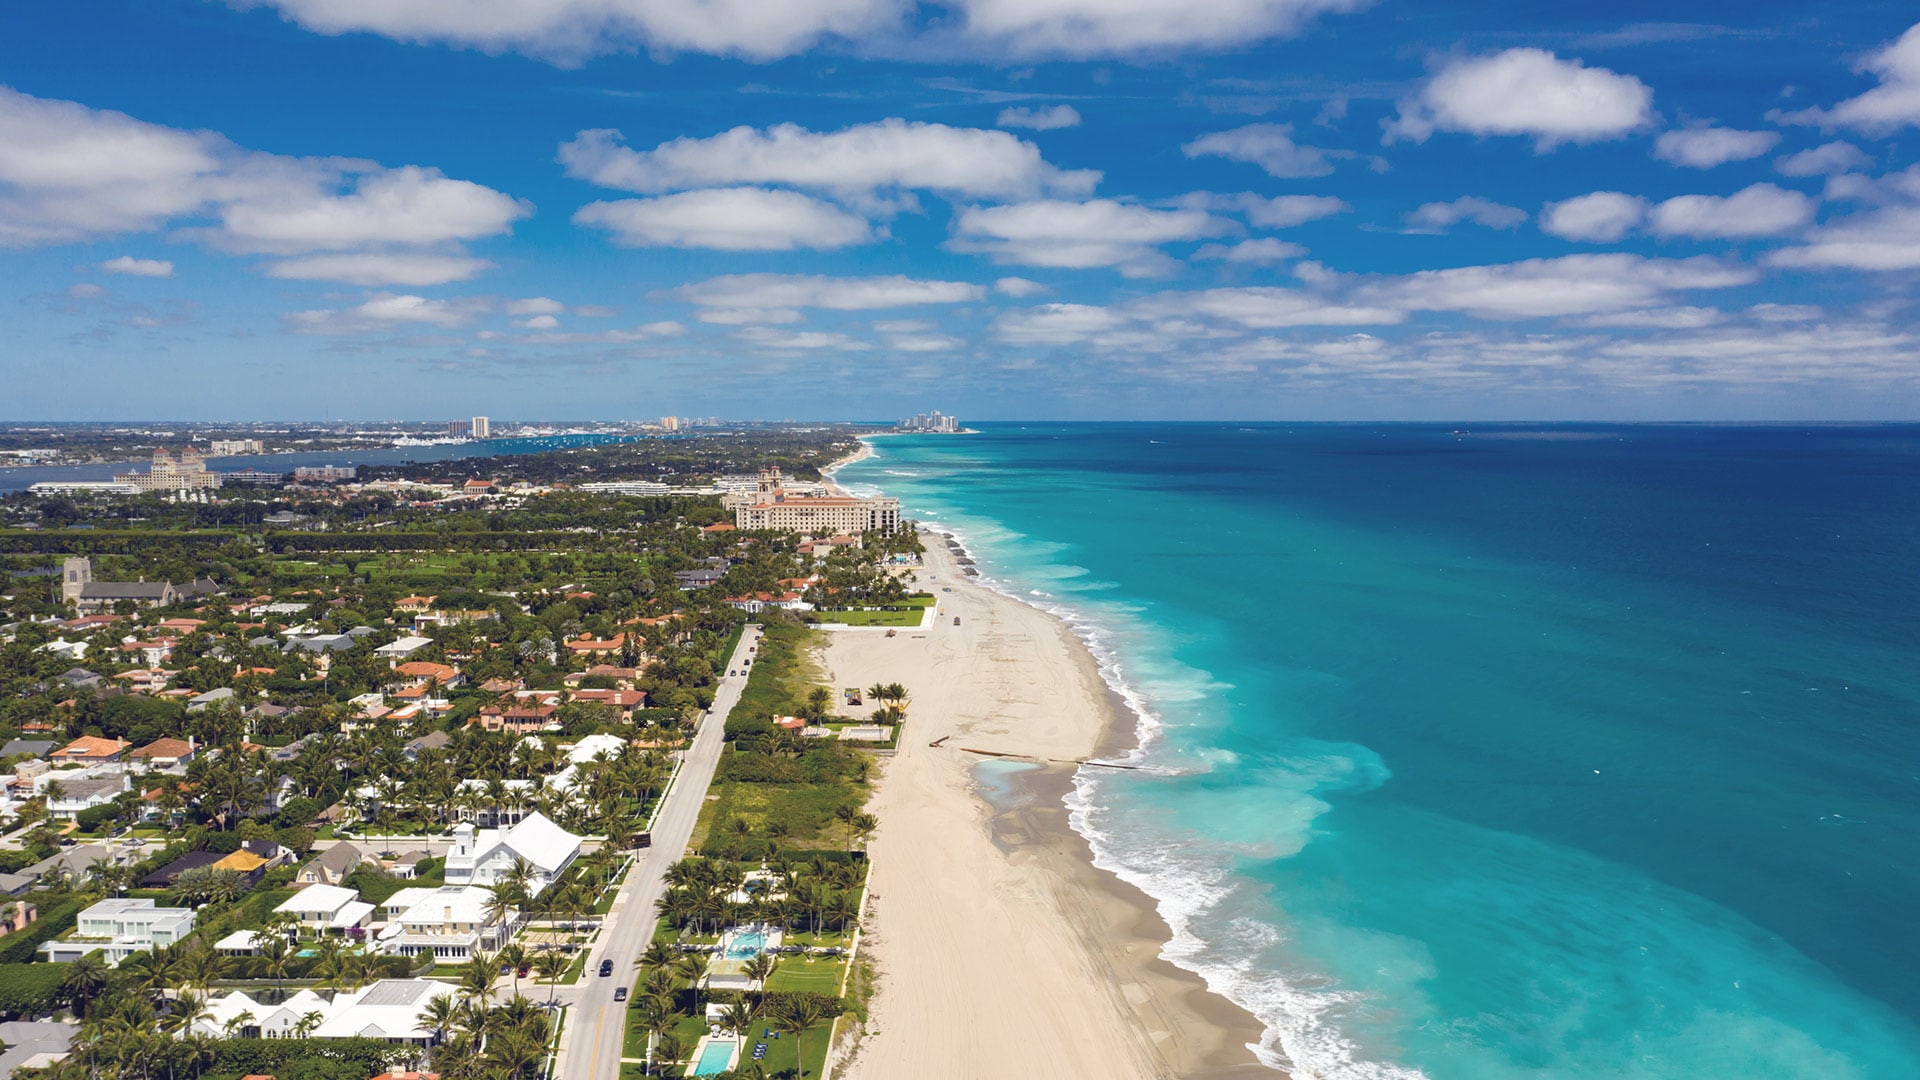 West Palm Beach Florida - Things to Do & Attractions